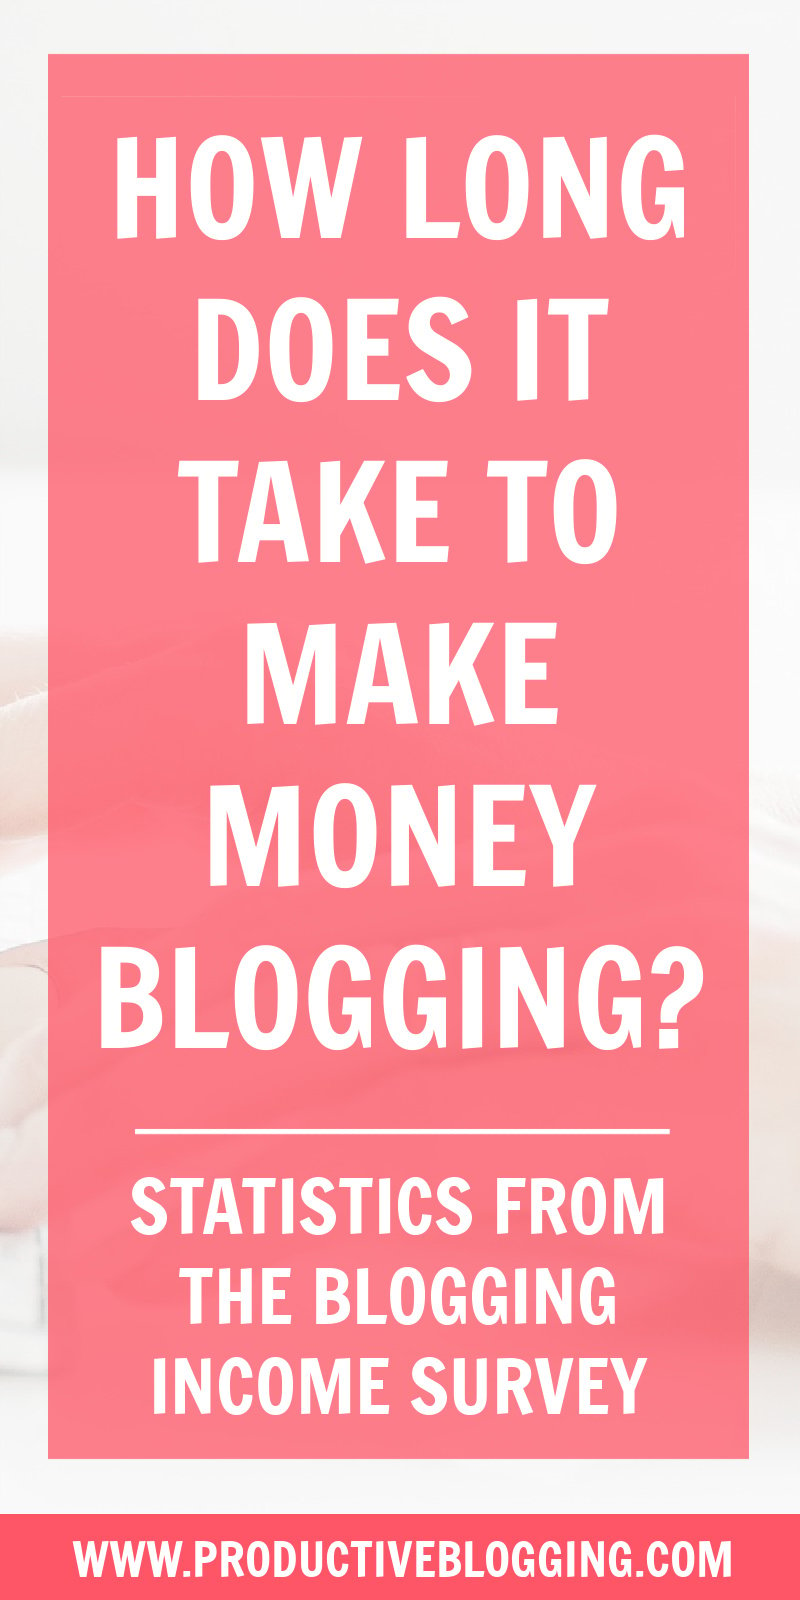 Blogging can be very lucrative… but only if you do it right! So, how long does it actually take to earn money from a blog in 2022? And what can be done to speed up the process? #bloggingincome #bloggingincomesurvey #bloggingstatistics #blogincome #makemoneyblogging #moneymakingblog #profitableblog #monetizeyourblog #blogging #blogger #professionalblogger #bloggingismyjob #solopreneur #mompreneur #fempreneur #bloggingbiz #bloggingtips #blogsmarternotharder #productiveblogging